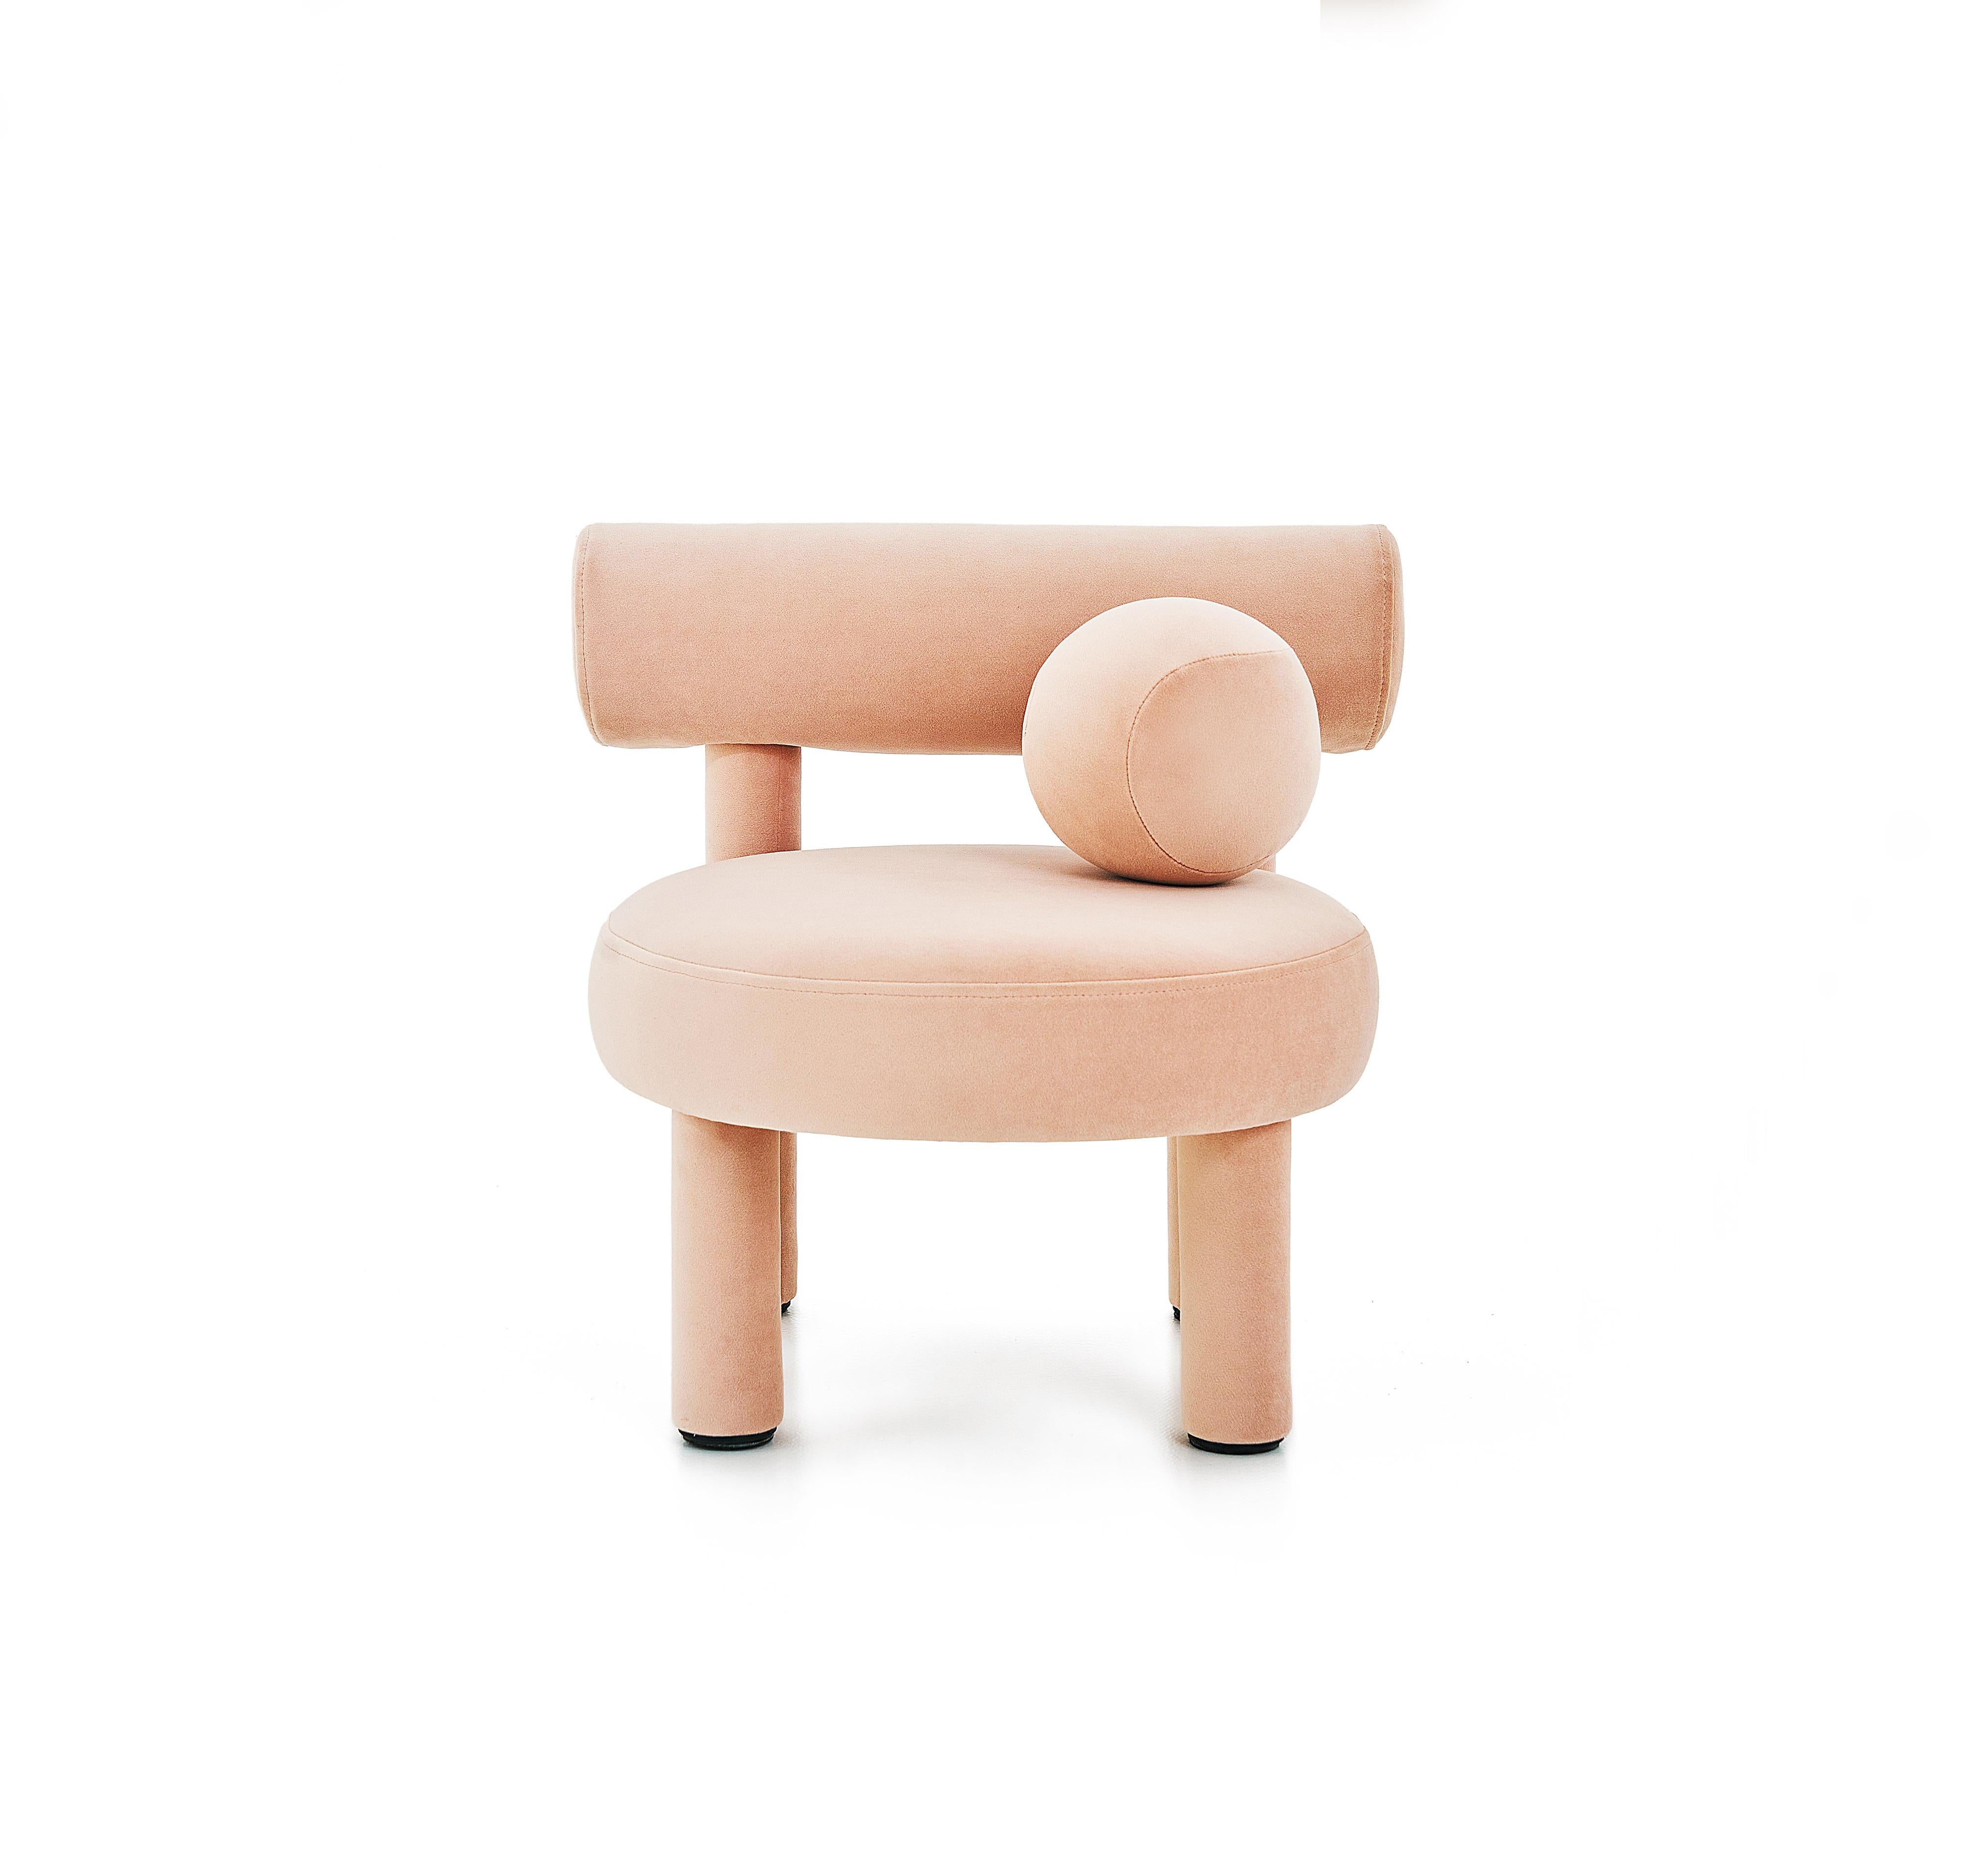 Baby Gropius chair is designed in the same spirit as the collection's flagman Gropius chair, which makes the brand signature.

We noted that kids love minimalist design and are always happy to interact with our chairs, and this fact encouraged us